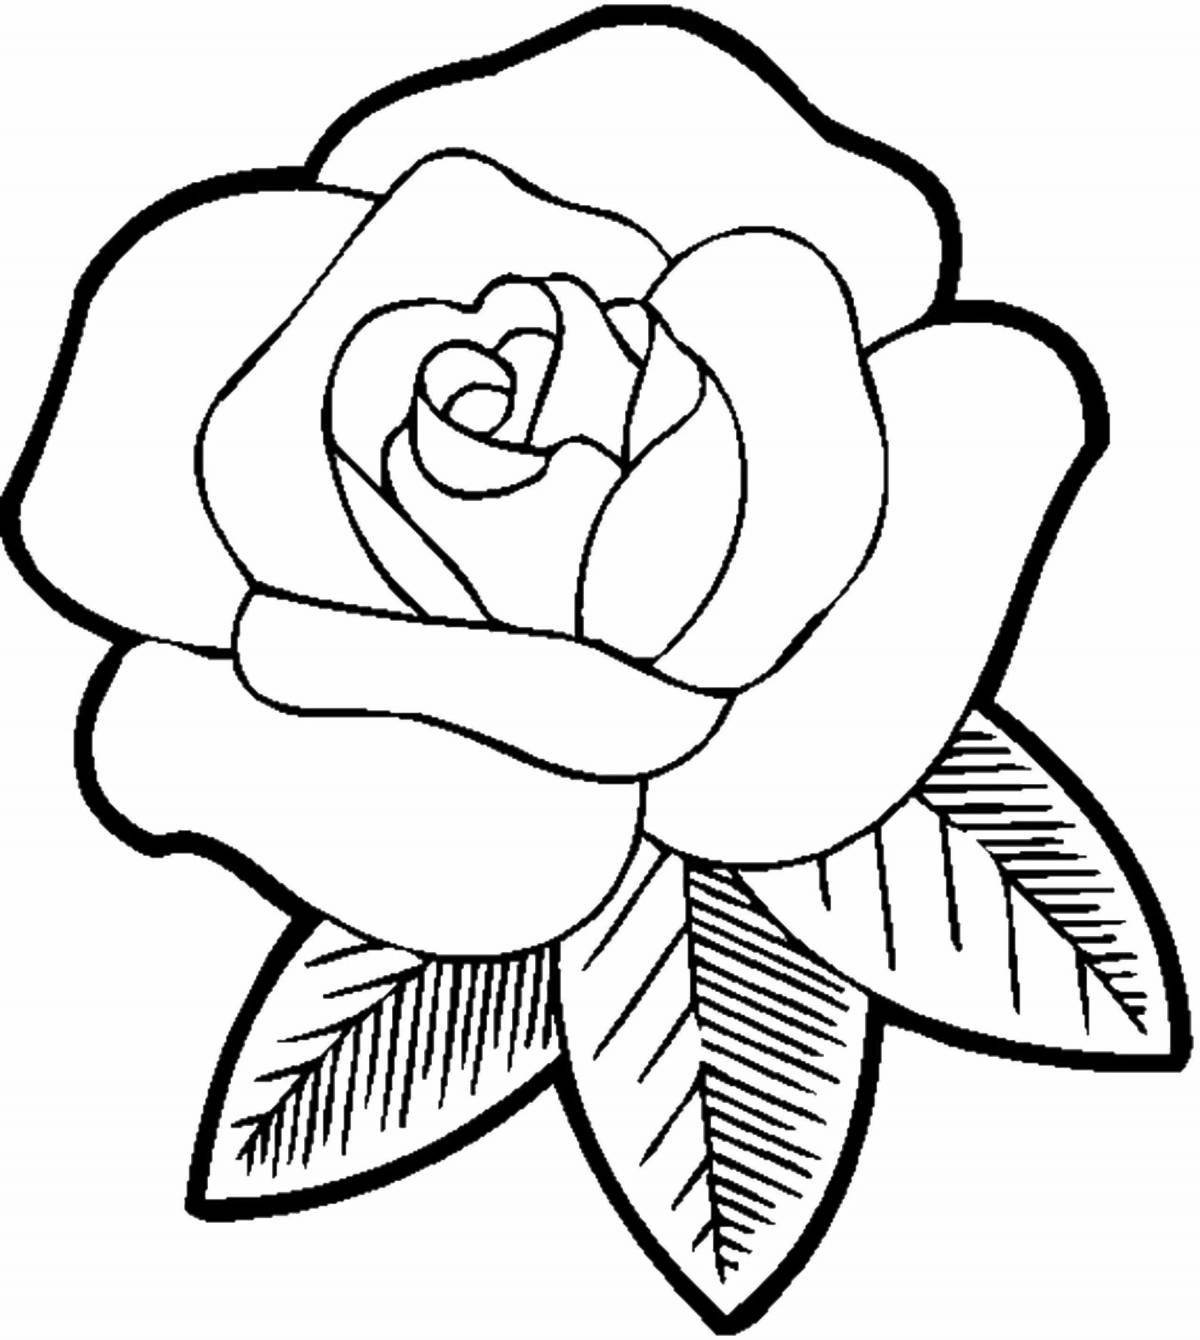 Exotic flowers coloring pages